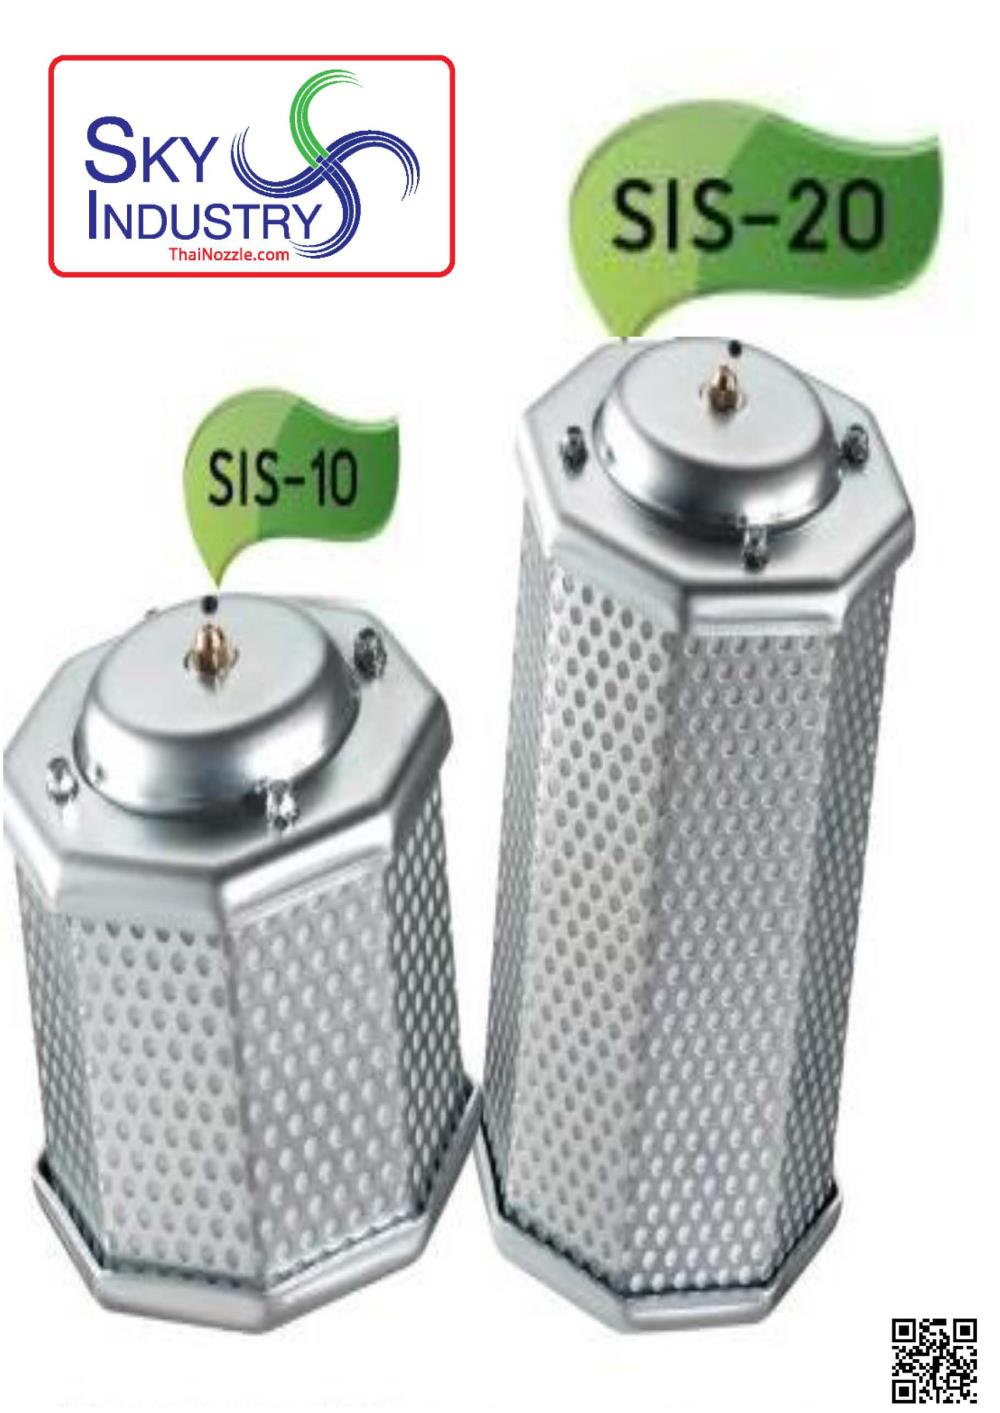 Silencers  Silvent No. SIS-10 and SIS-20